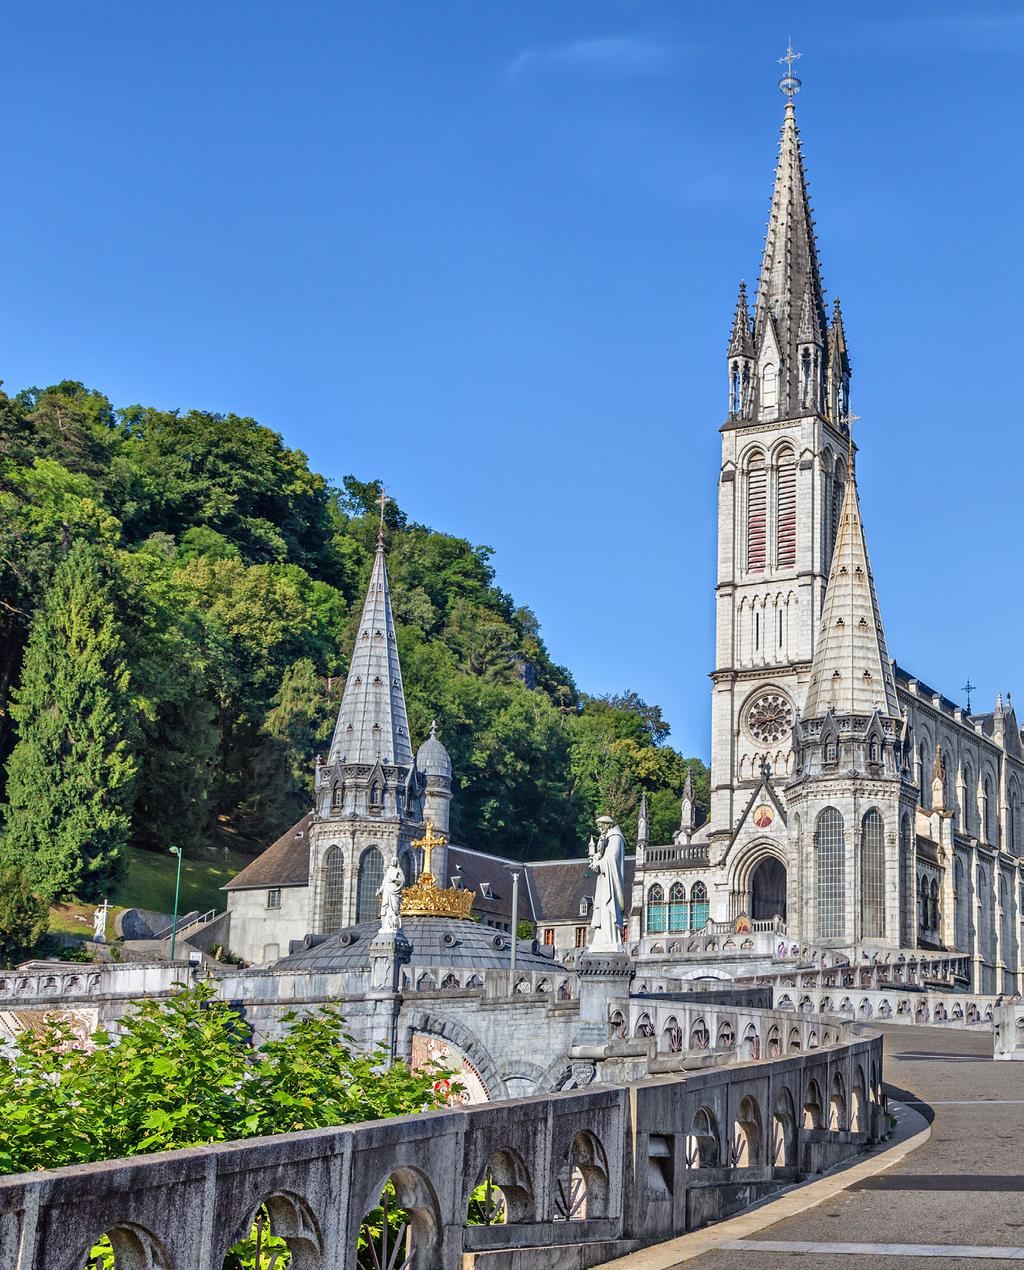 LOURDES FULLY ESCORTED PILGRIMAGES DUBLIN DEPARTURES EASTER PILGRIMAGE PILGRIMAGE TO LOURDES 6 May 5 nights 19 August 4 nights from f 699 MINI BREAKS 22 July 3 nights f619 18 April 4 nights 7 May 4